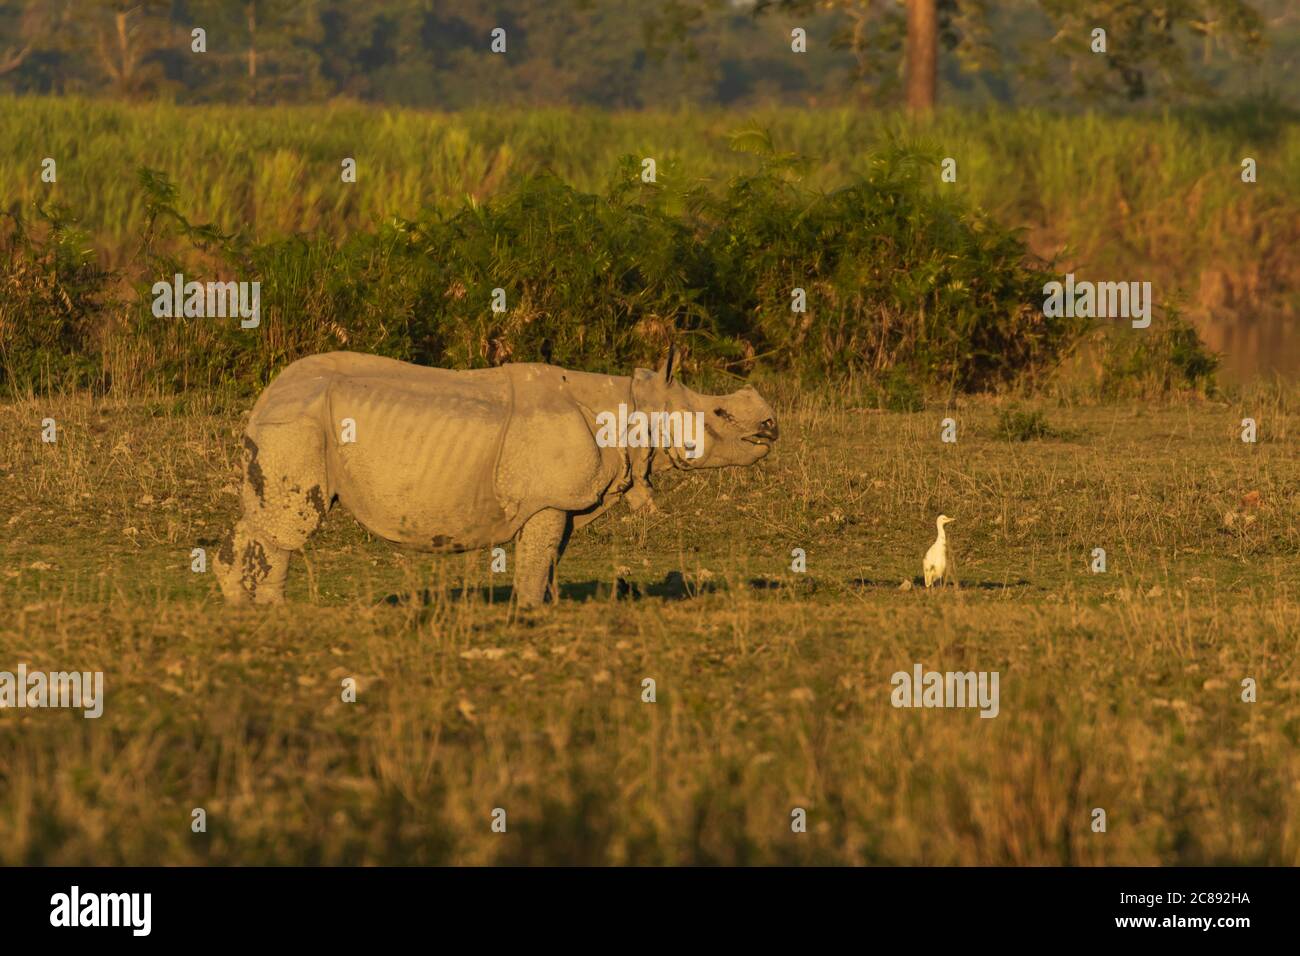 A one horned rhino standing amidst tall grass in a national park in Assam India Stock Photo